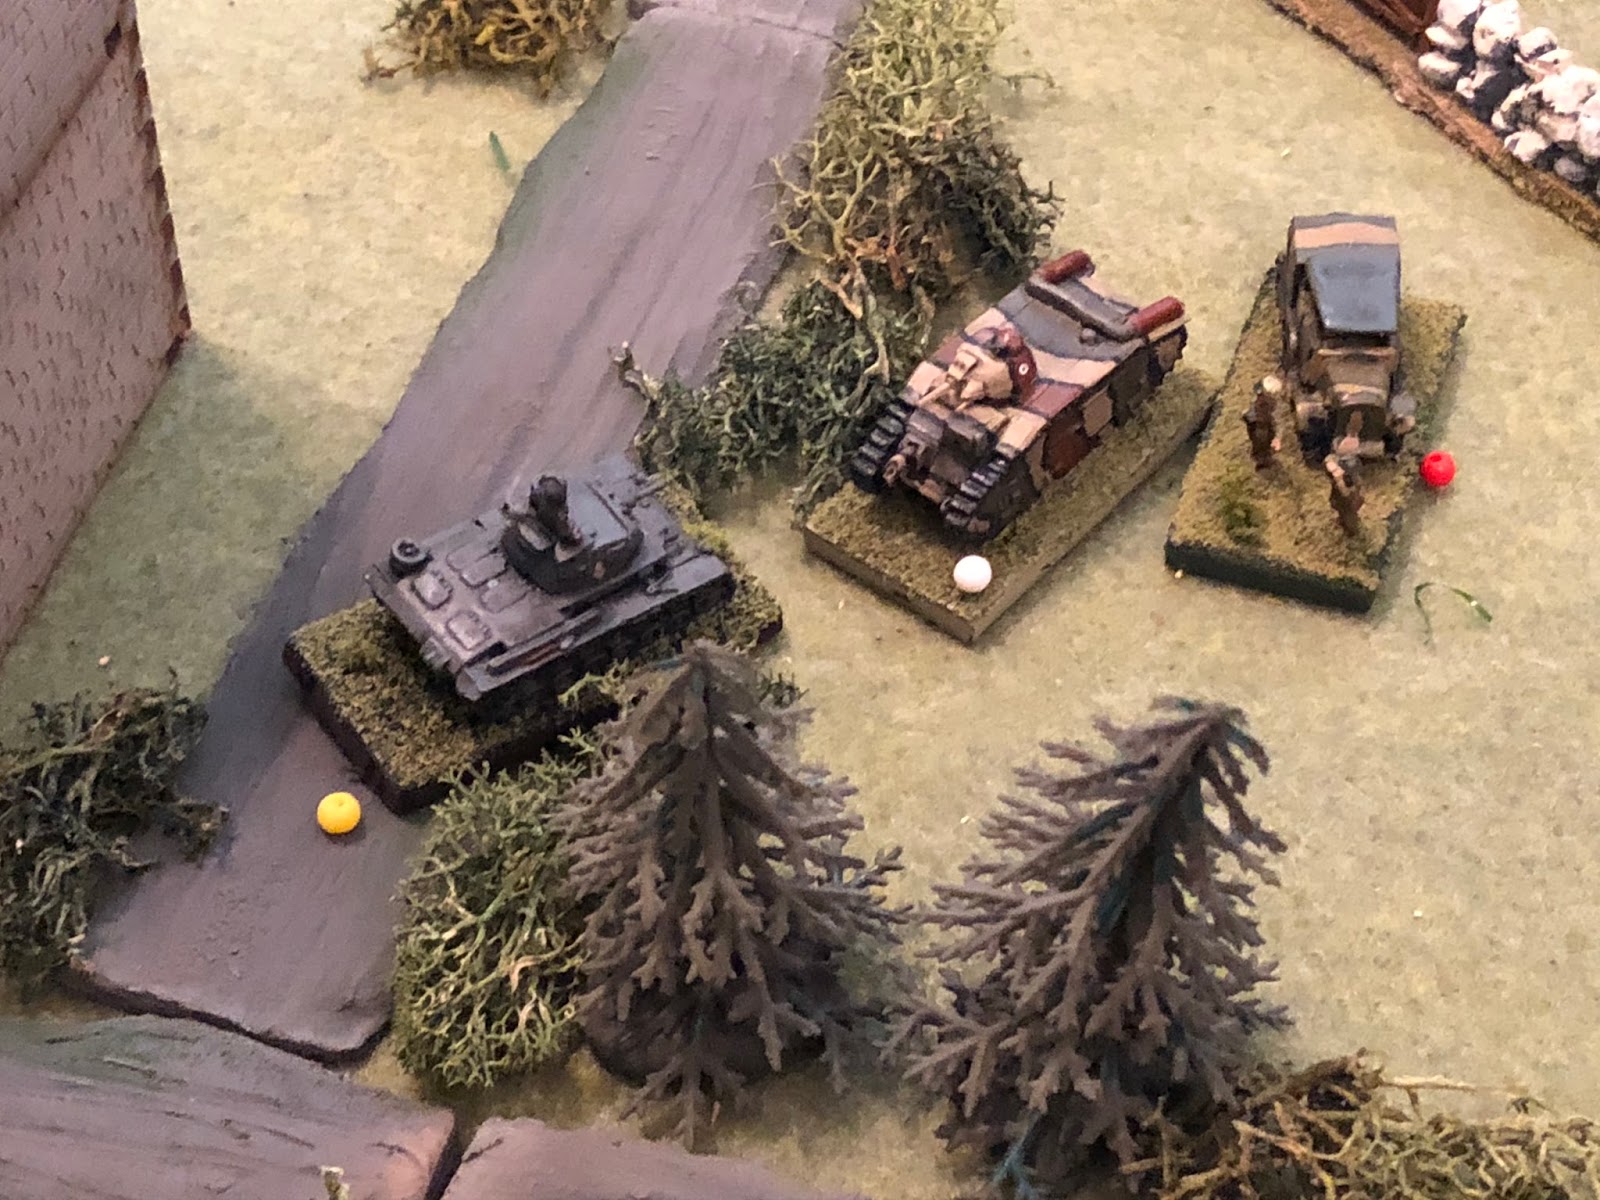  Lt Loeb throws caution to the wind, charging his tank almost nose to nose with the Char B!&nbsp; The French turret begins to swivel towards the German panzer as Lt Loeb's gunner pumps round after round at the enemy tank's gun barrels and vision slit